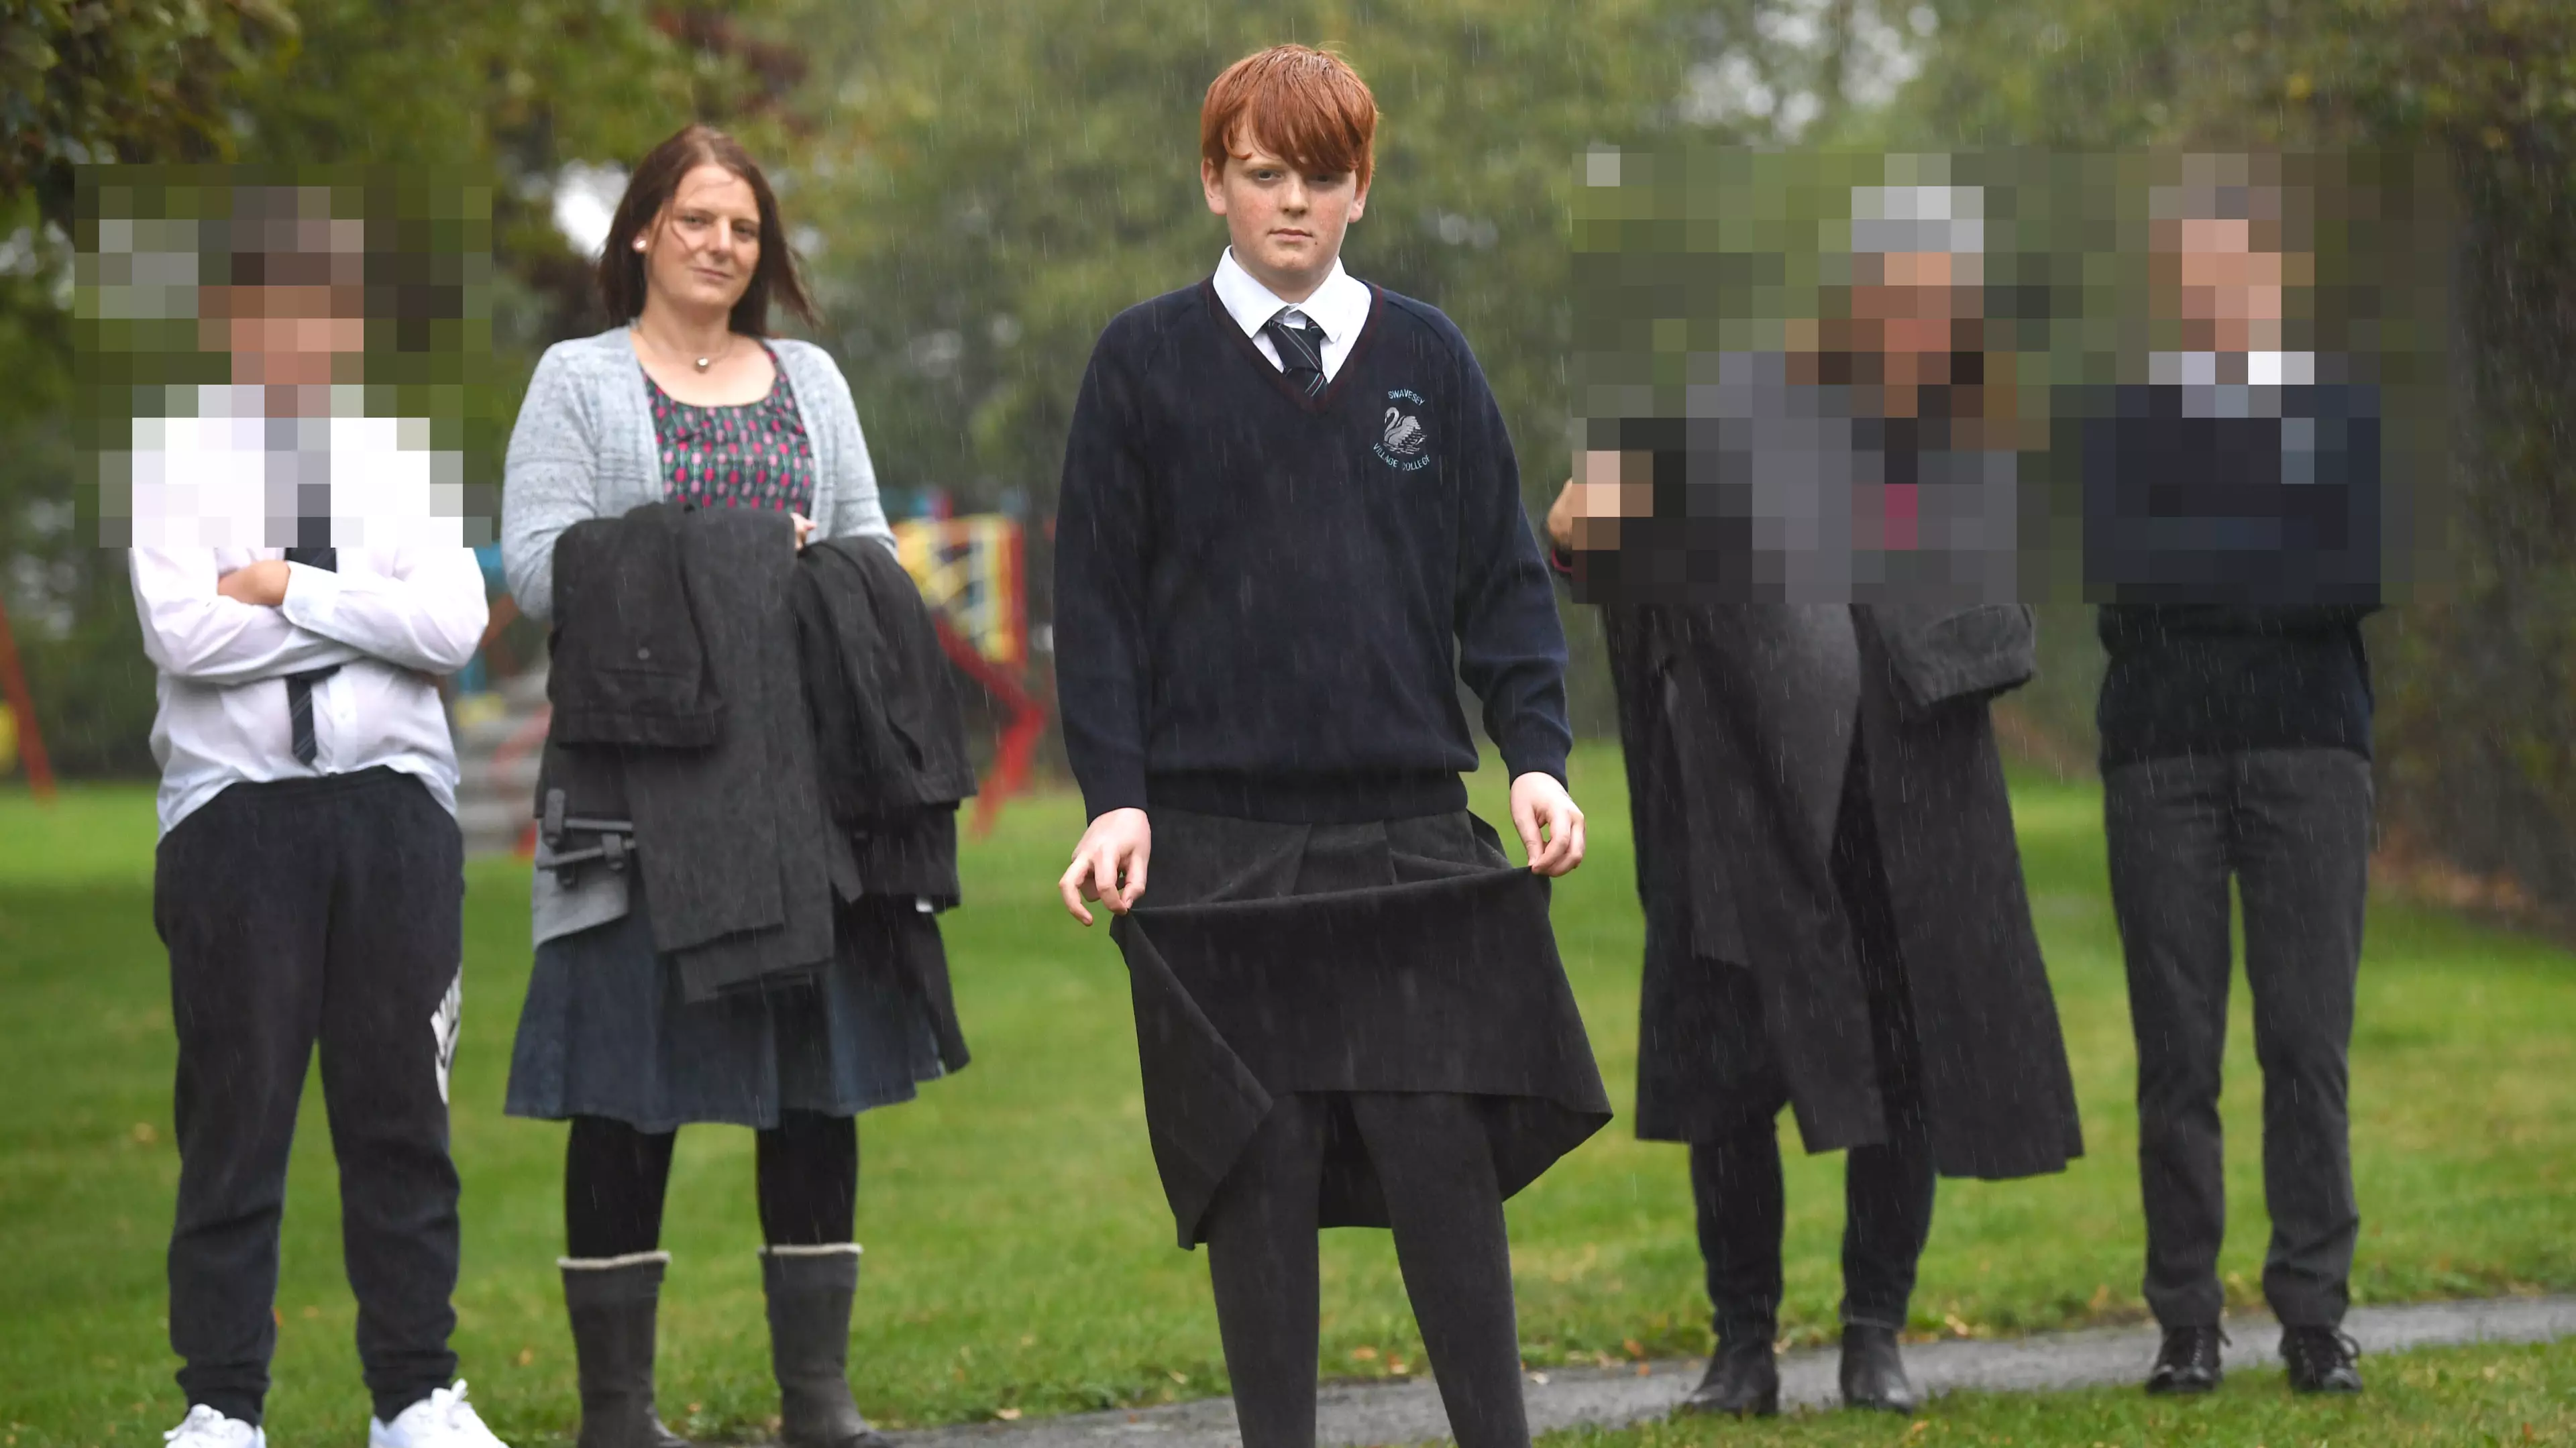 Schoolboy Wears Skirt To School After Being 'Kicked Out Of Lessons' For Wearing 'Wrong Trousers' 